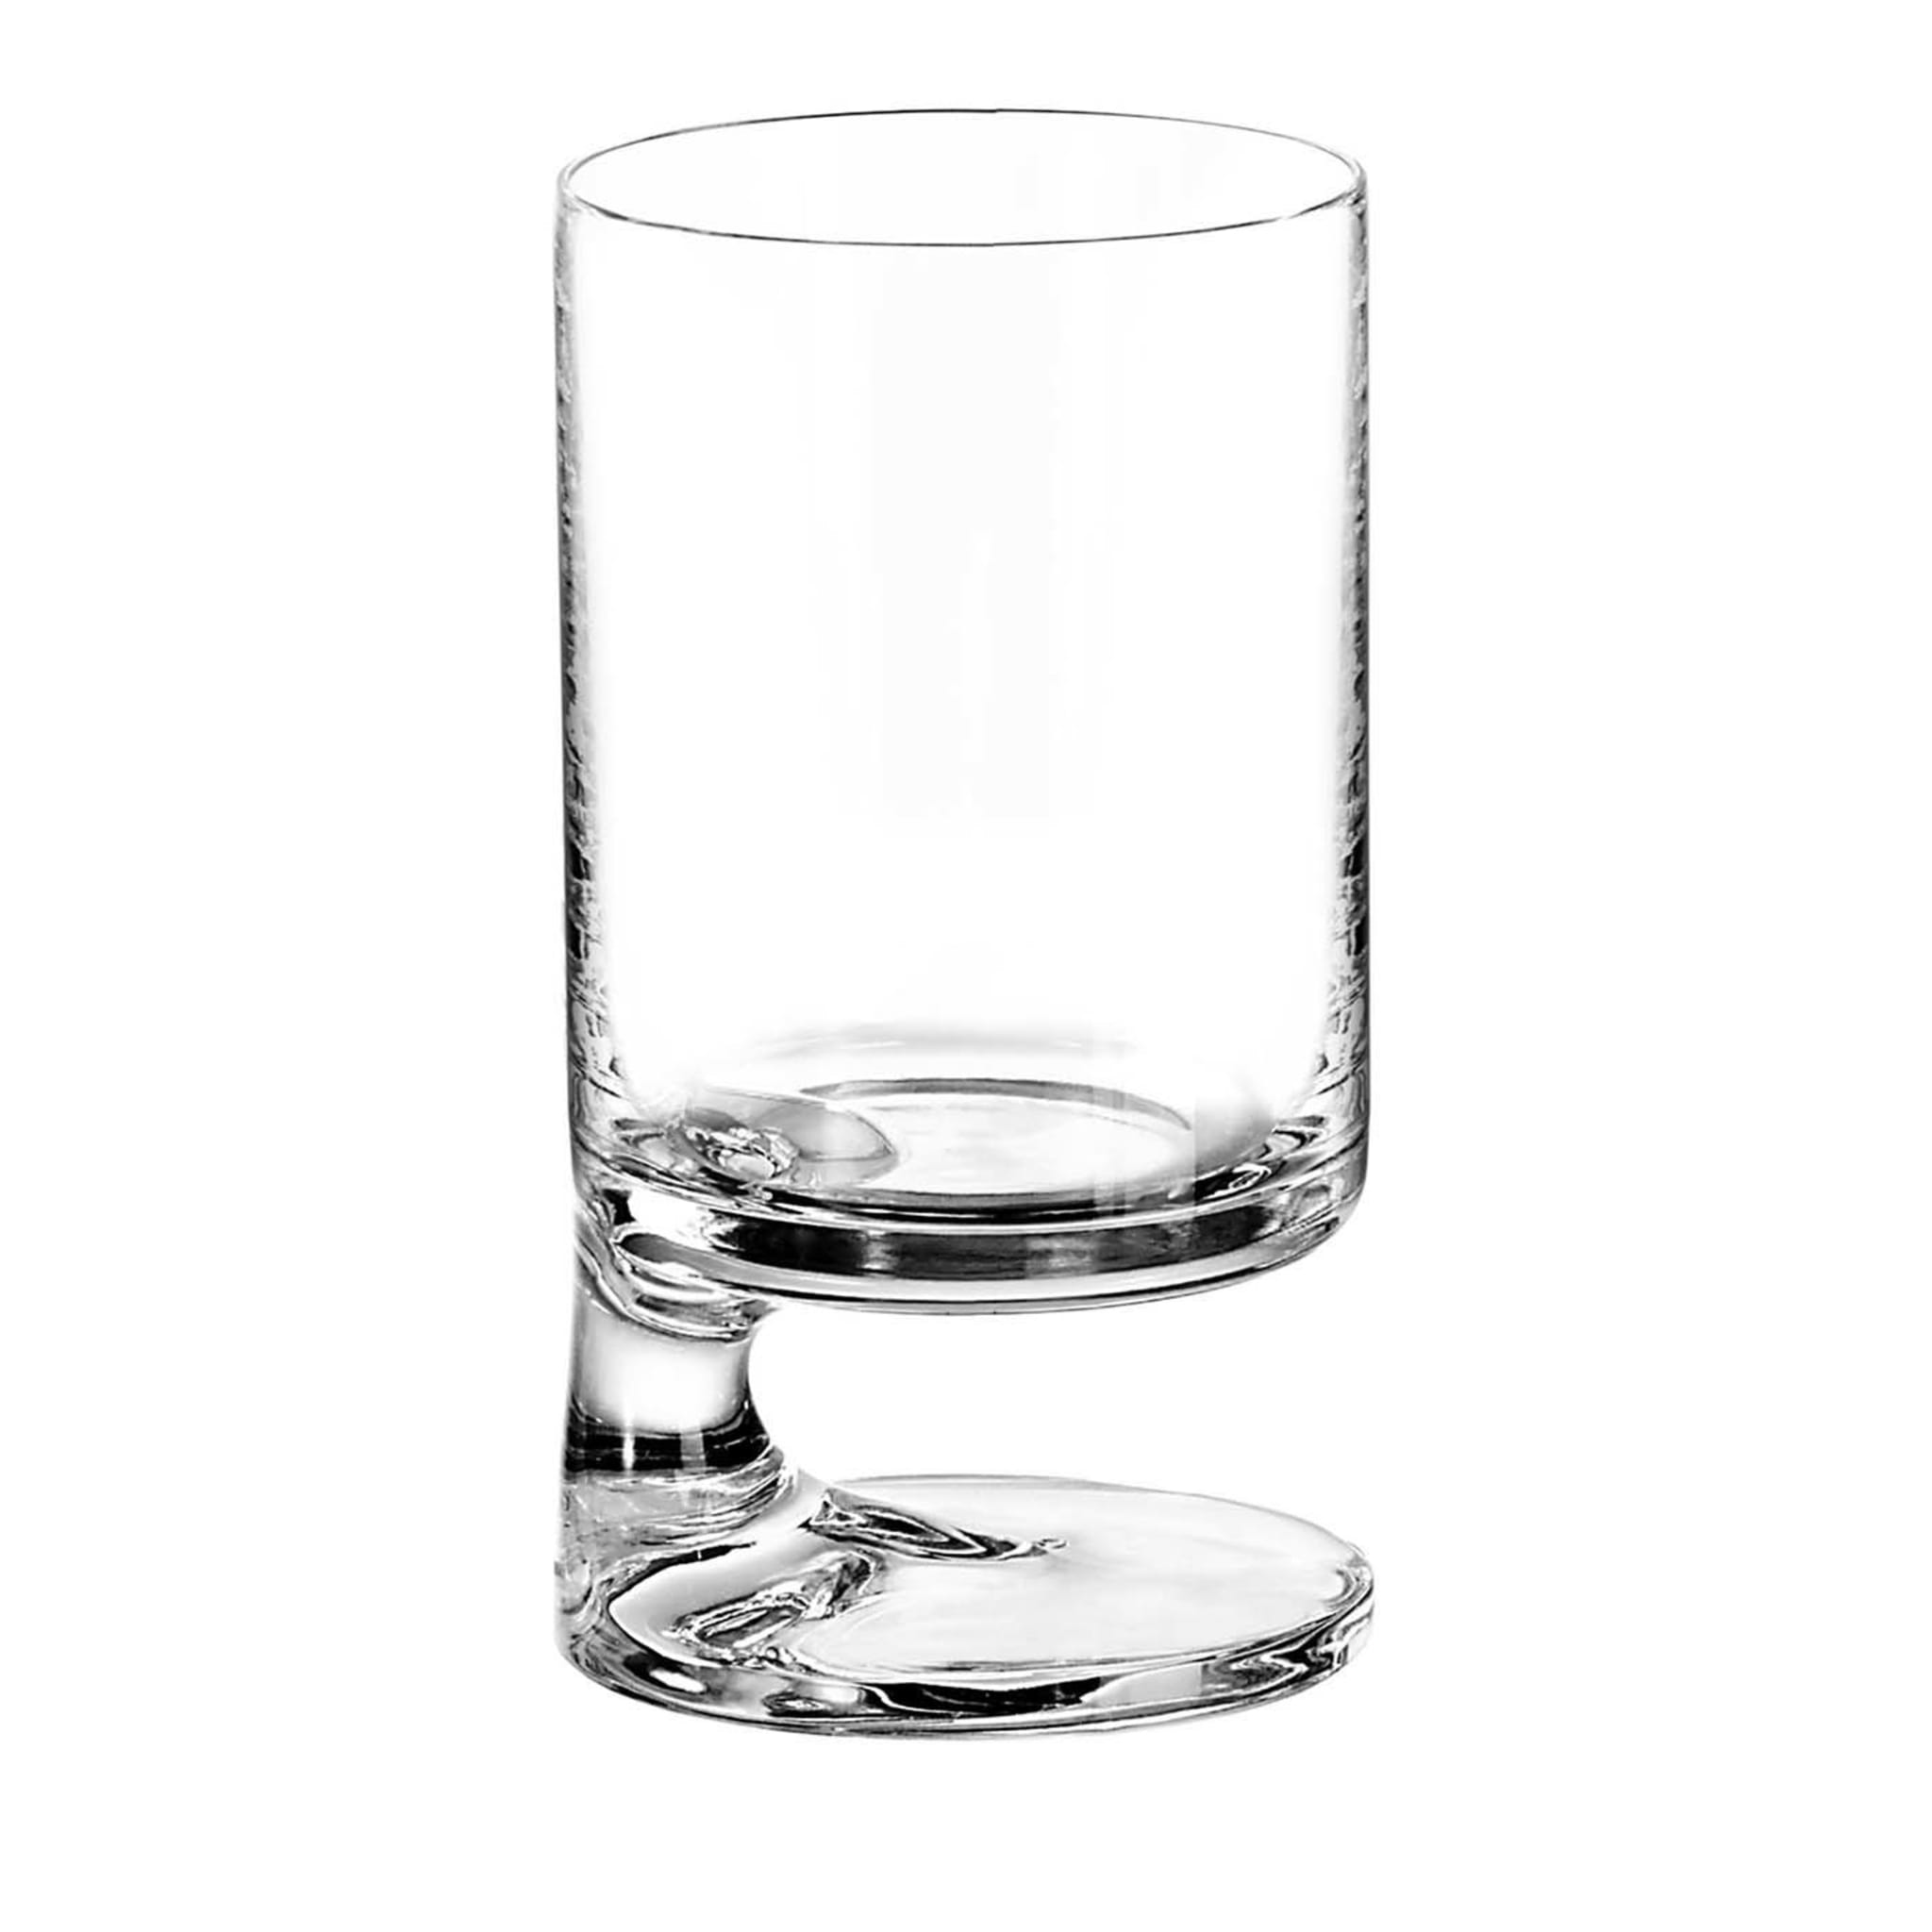 Reserve Nouveau Crystal Wine Glasses in Smoke Set of 2